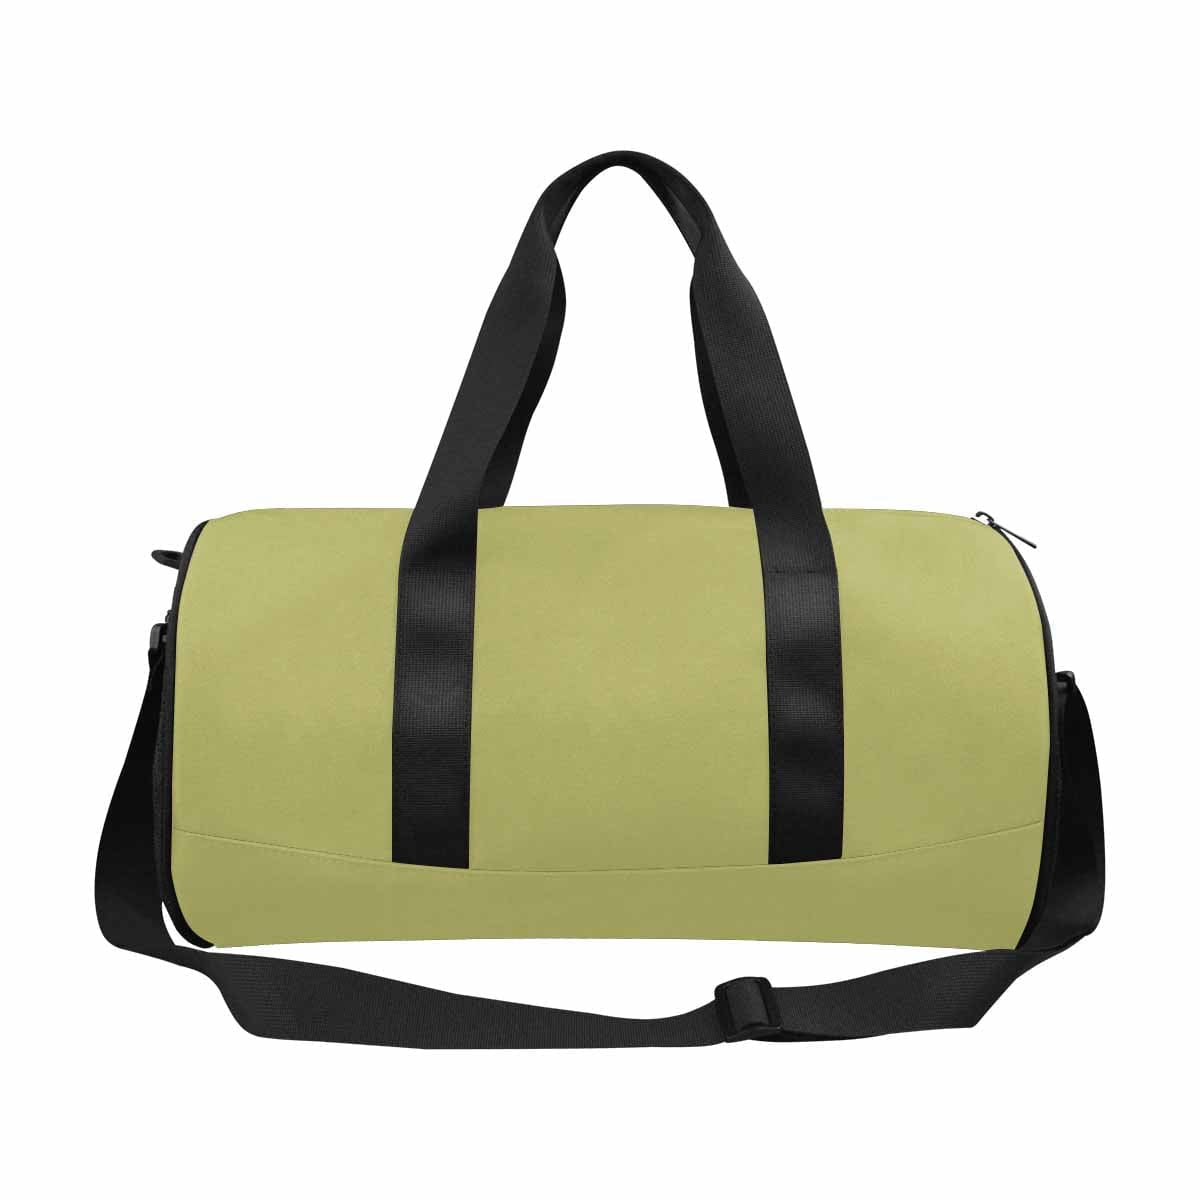 Travel Duffel Bag Olive Green Carry On - Bags | Duffel Bags